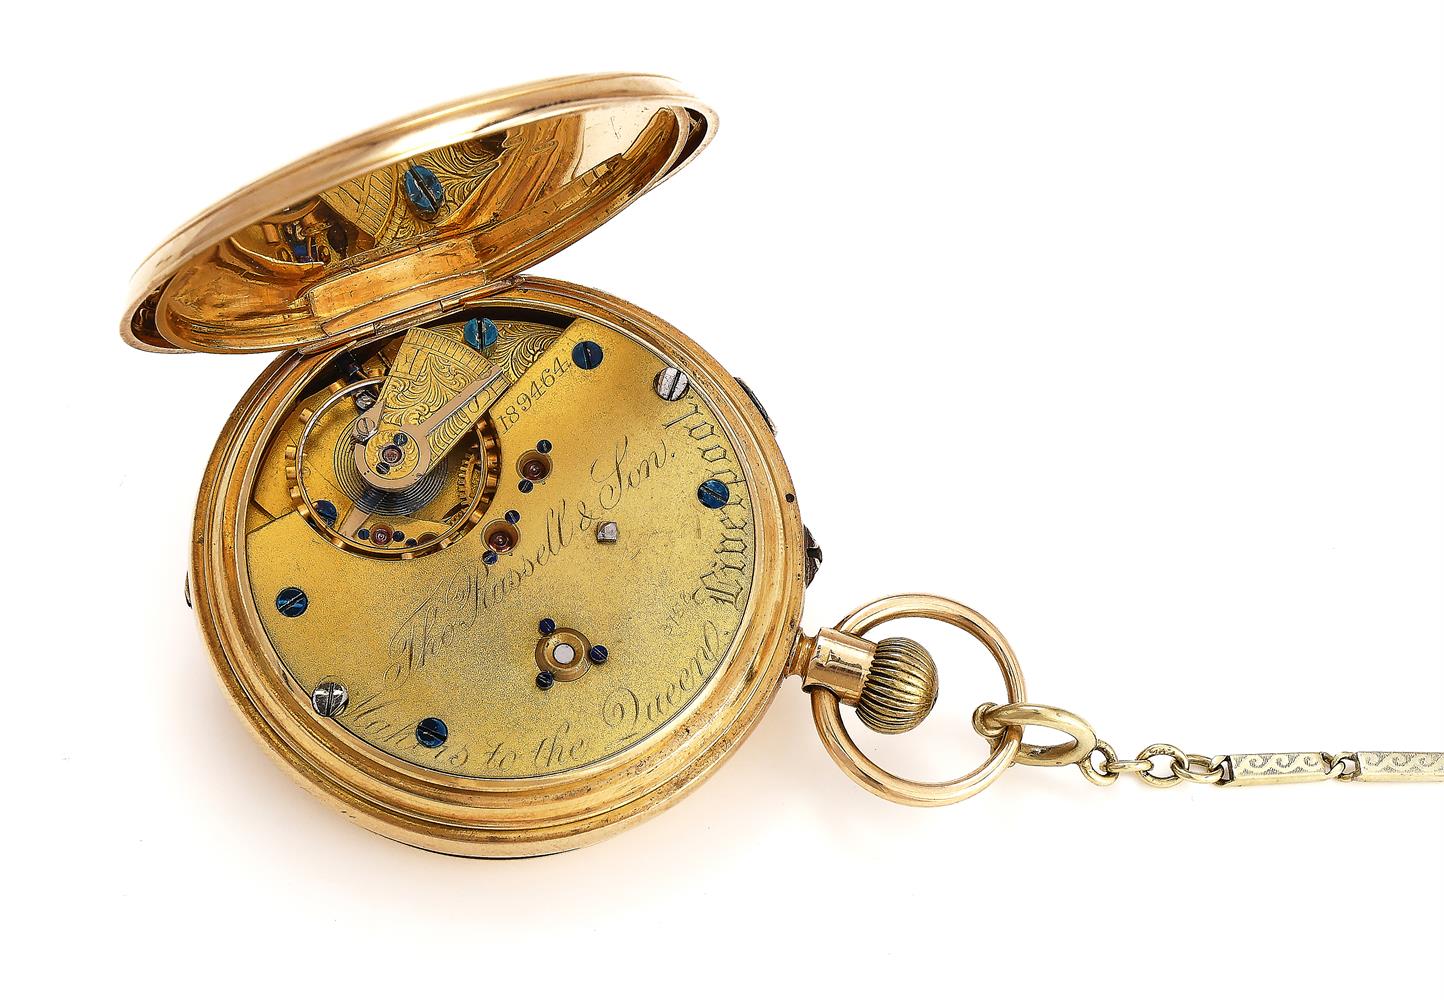 THOMAS RUSSELL & SON, LIVERPOOL, AN 18 CARAT GOLD KEYLESS WIND FULL HUNTER POCKET WATCH - Image 2 of 2